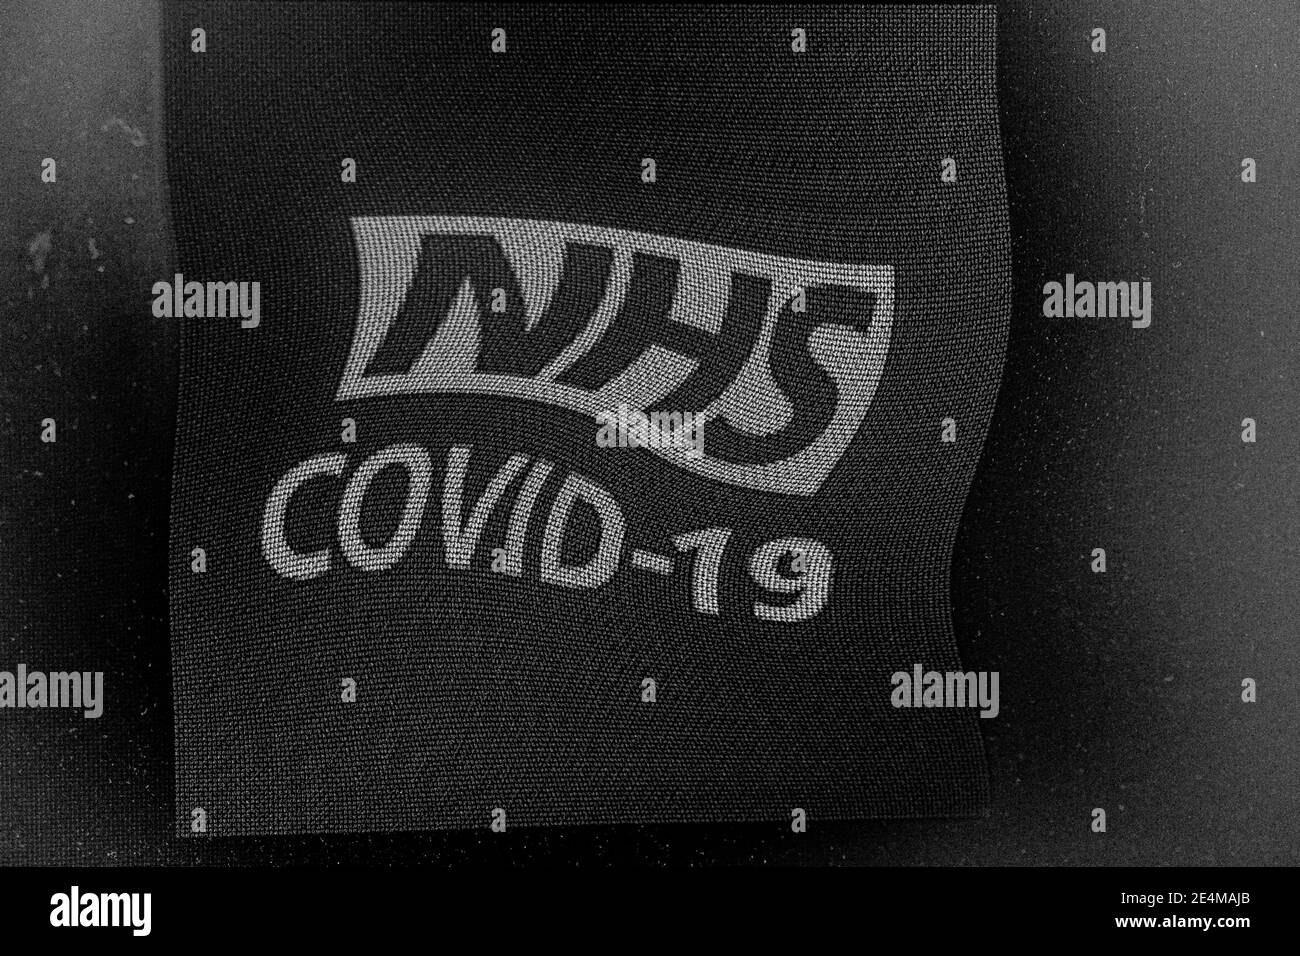 A closeup of distorted NHS COVID-19 contact tracing logo for monitoring the spread of the COVID-19 pandemic in England and Wales. Stock Photo